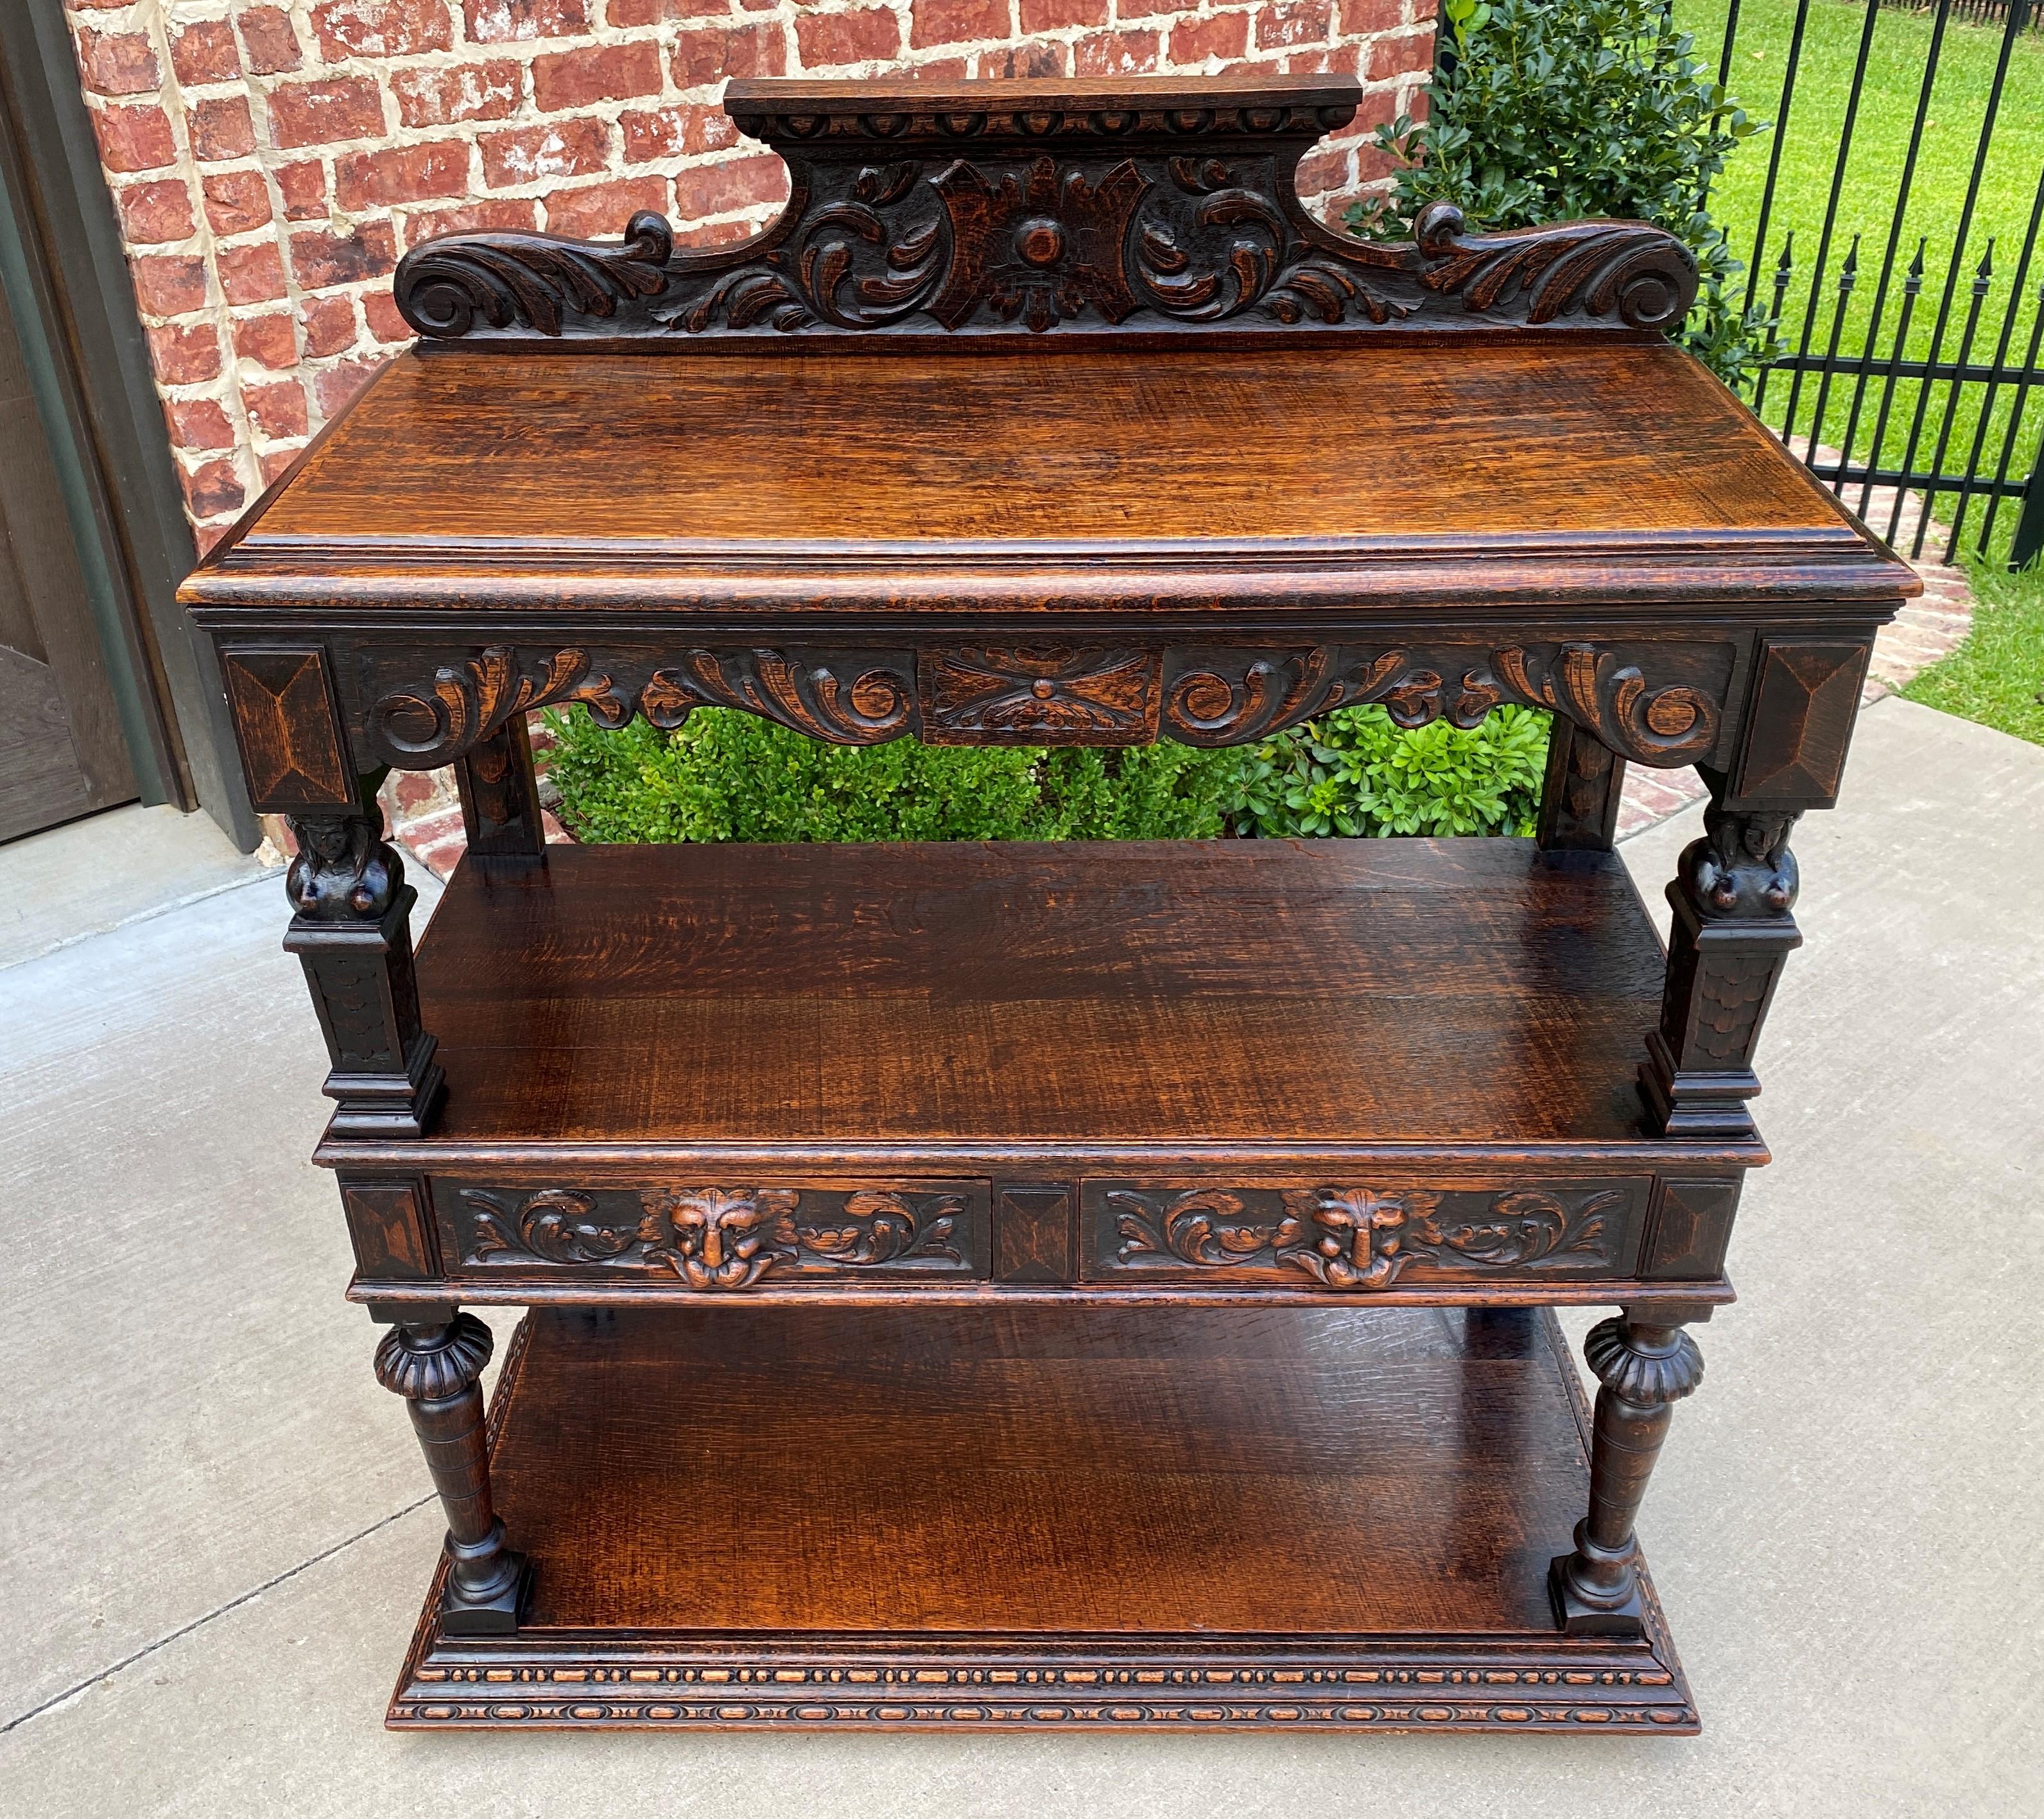 Late 19th Century Antique English Server Sideboard Buffet 3-Tier Gothic Revival Oak 2 Drawers 1890